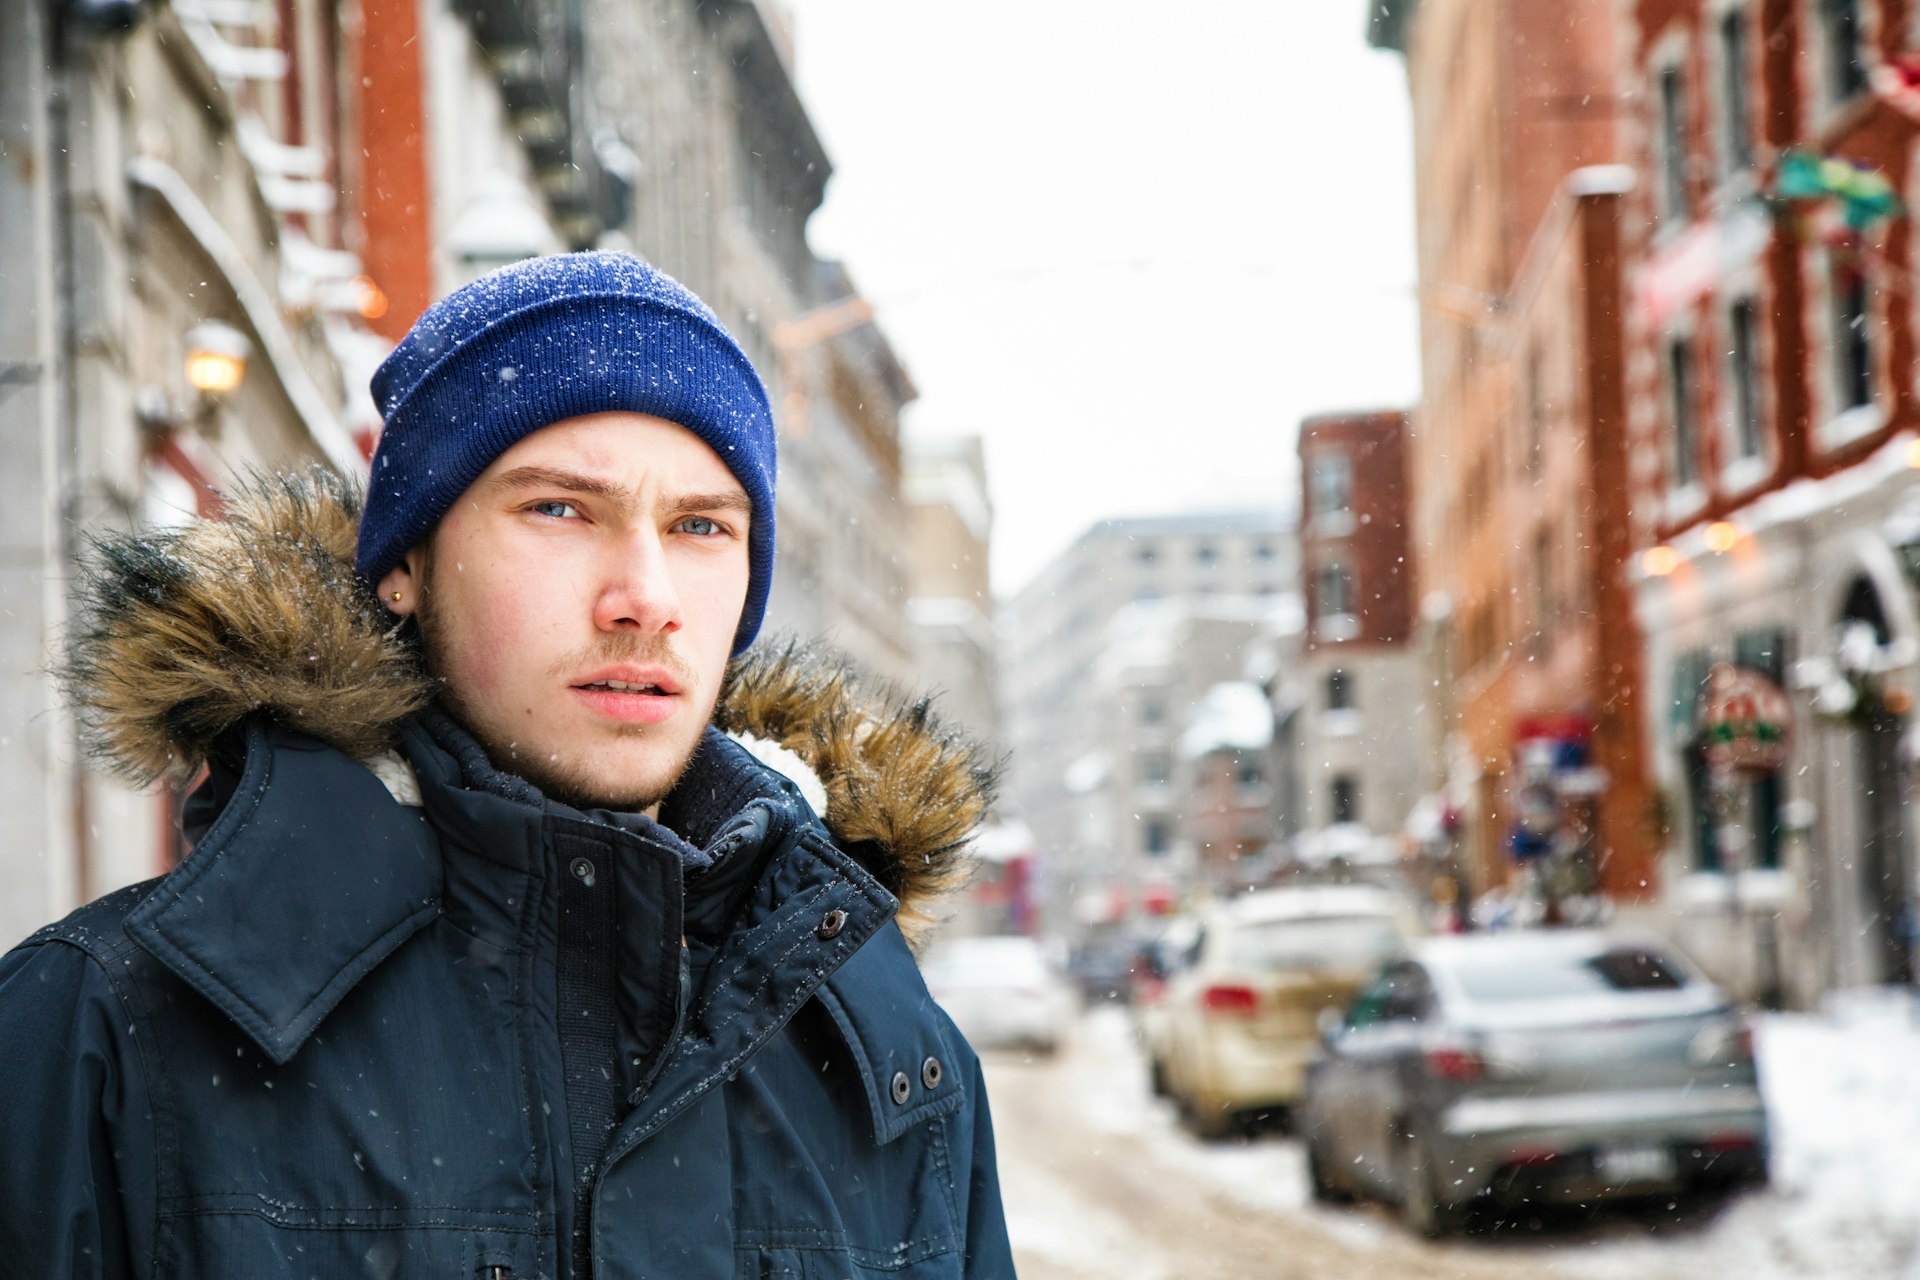 A young man in a snowy street in Vieux Montréal, Québec, Canada